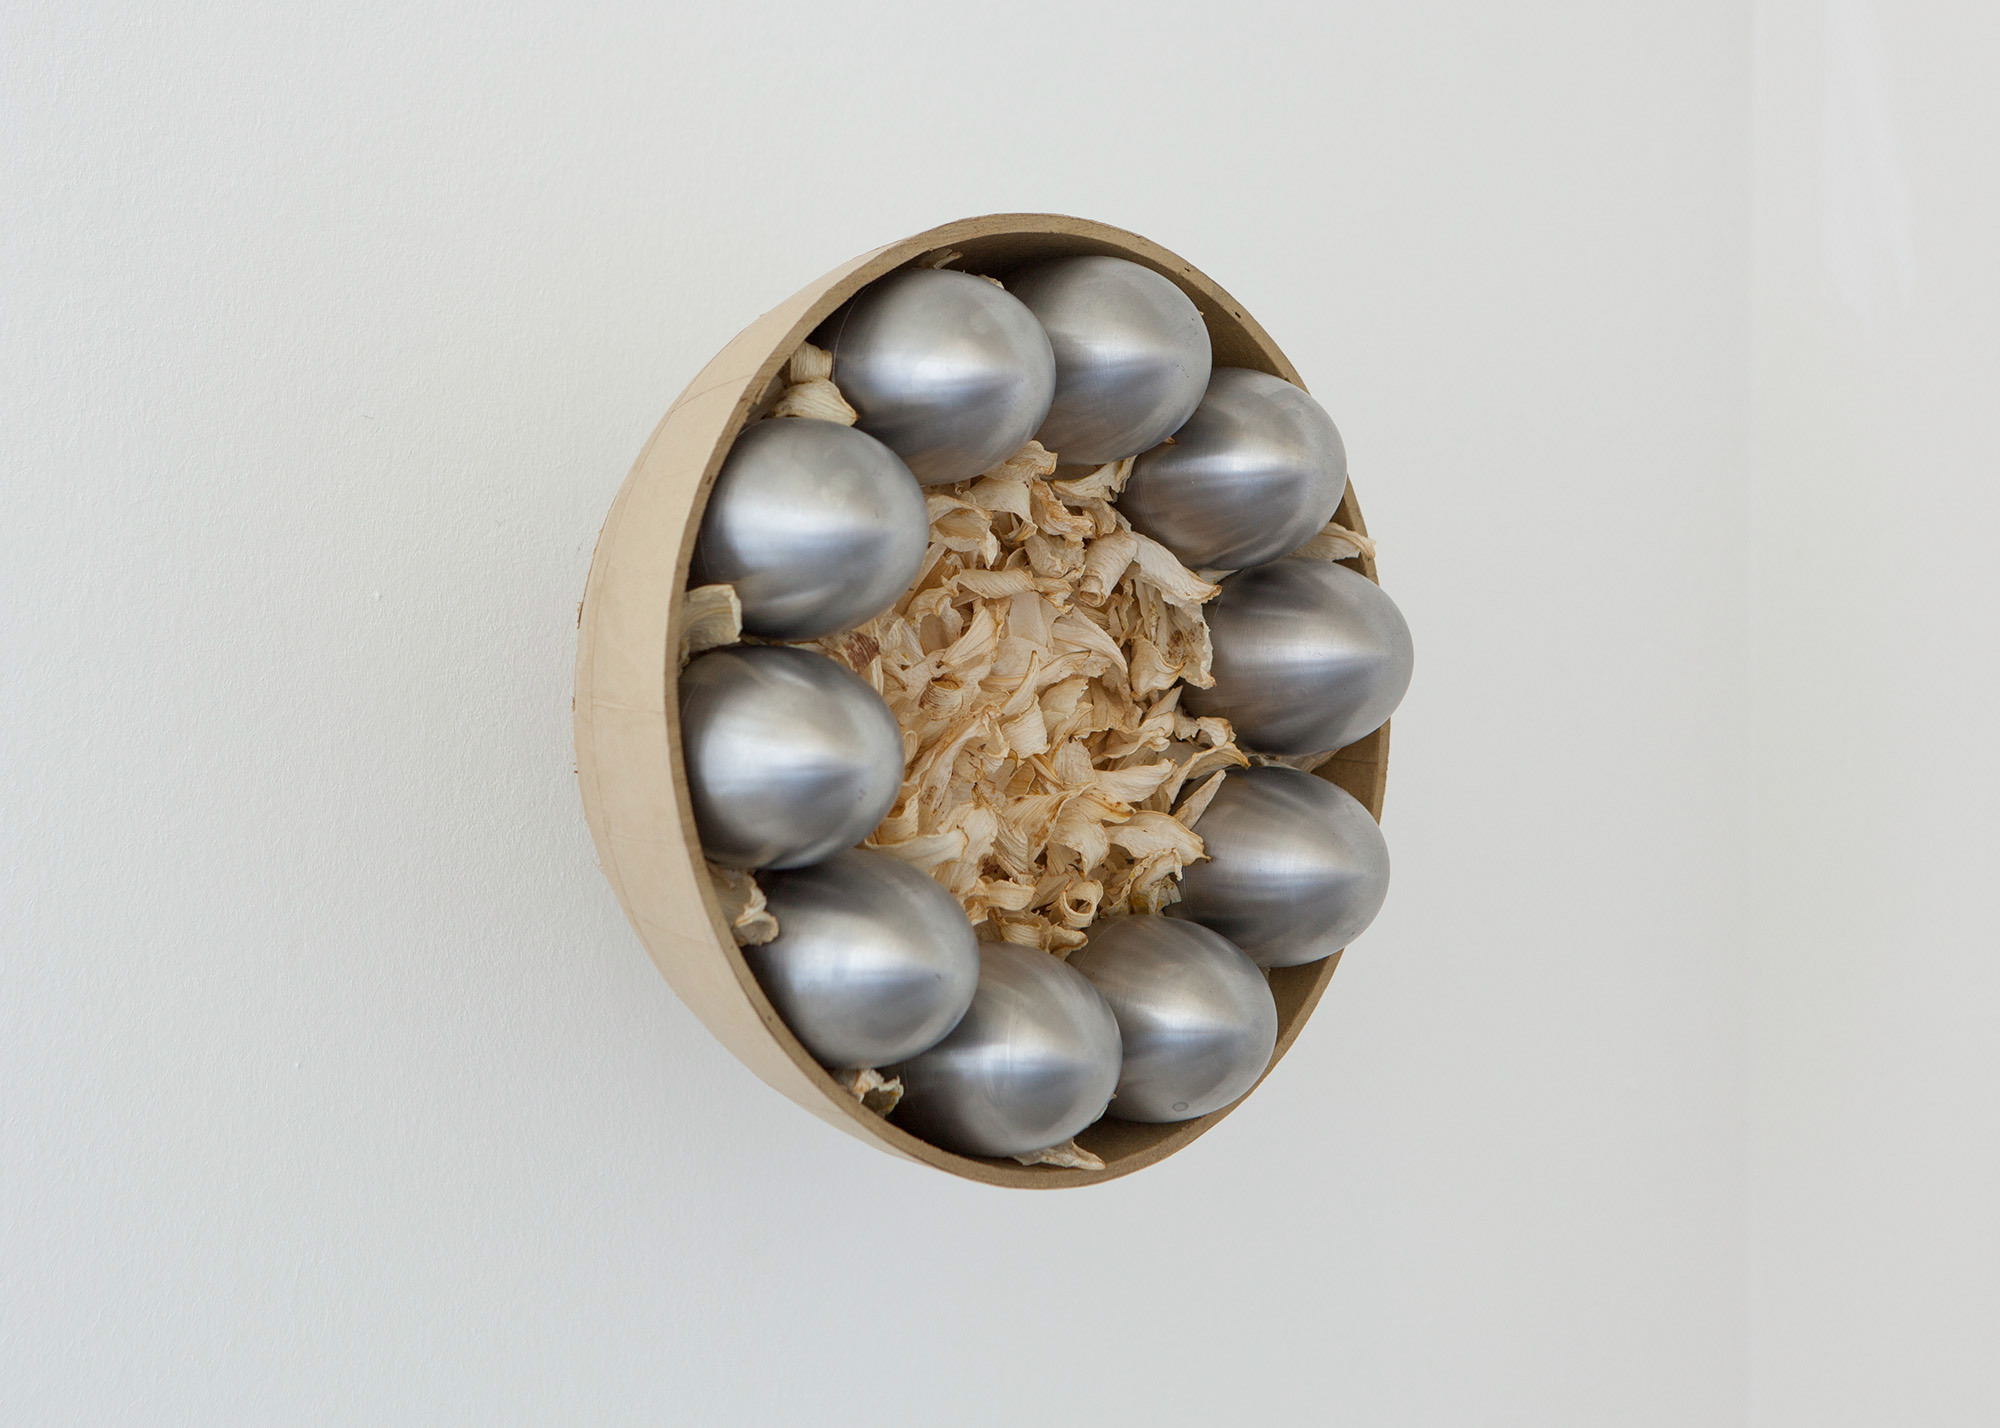 Julian Siffert, in bloom, [...] out, carried [...] home, 2022, spherical firework shell, stainless steel, dried white lilies, 32 Ã— 32 Ã— 15 cm